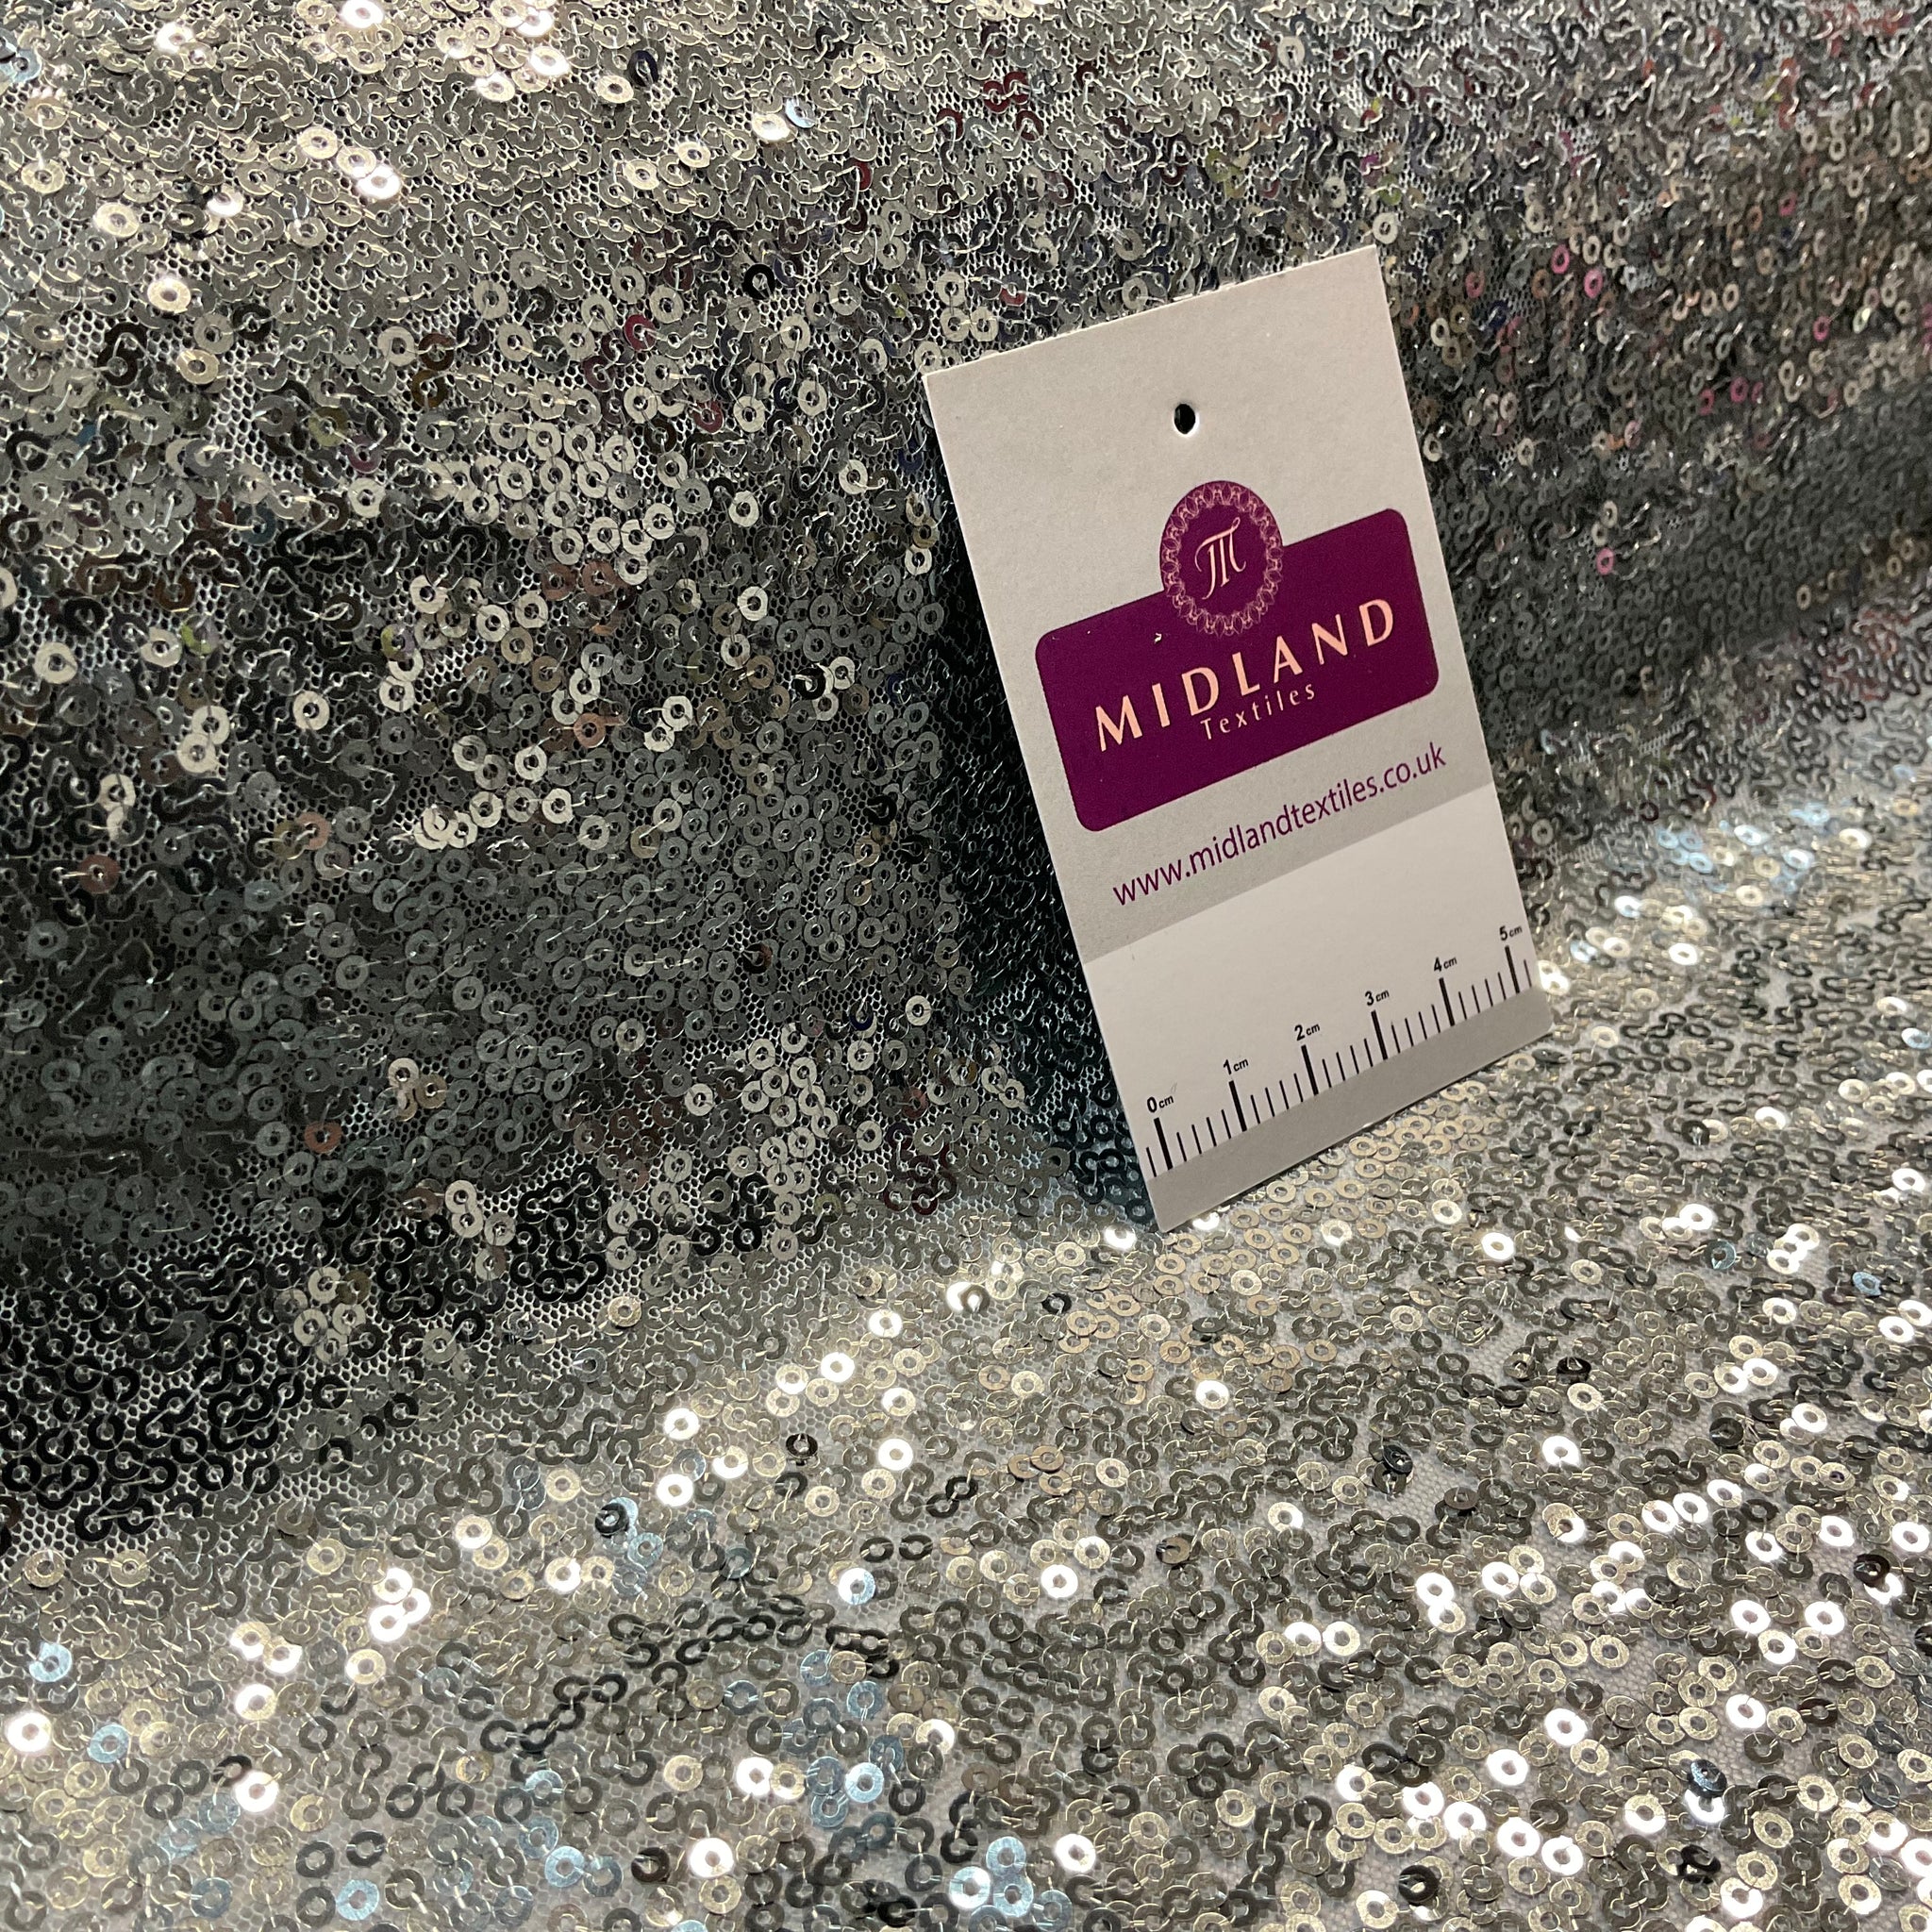 SENSATIONAL 3MM SEW ON ALL OVER SEQUINS ON NET FABRIC 50" WIDE DRESS FABRIC M1797 MTEX